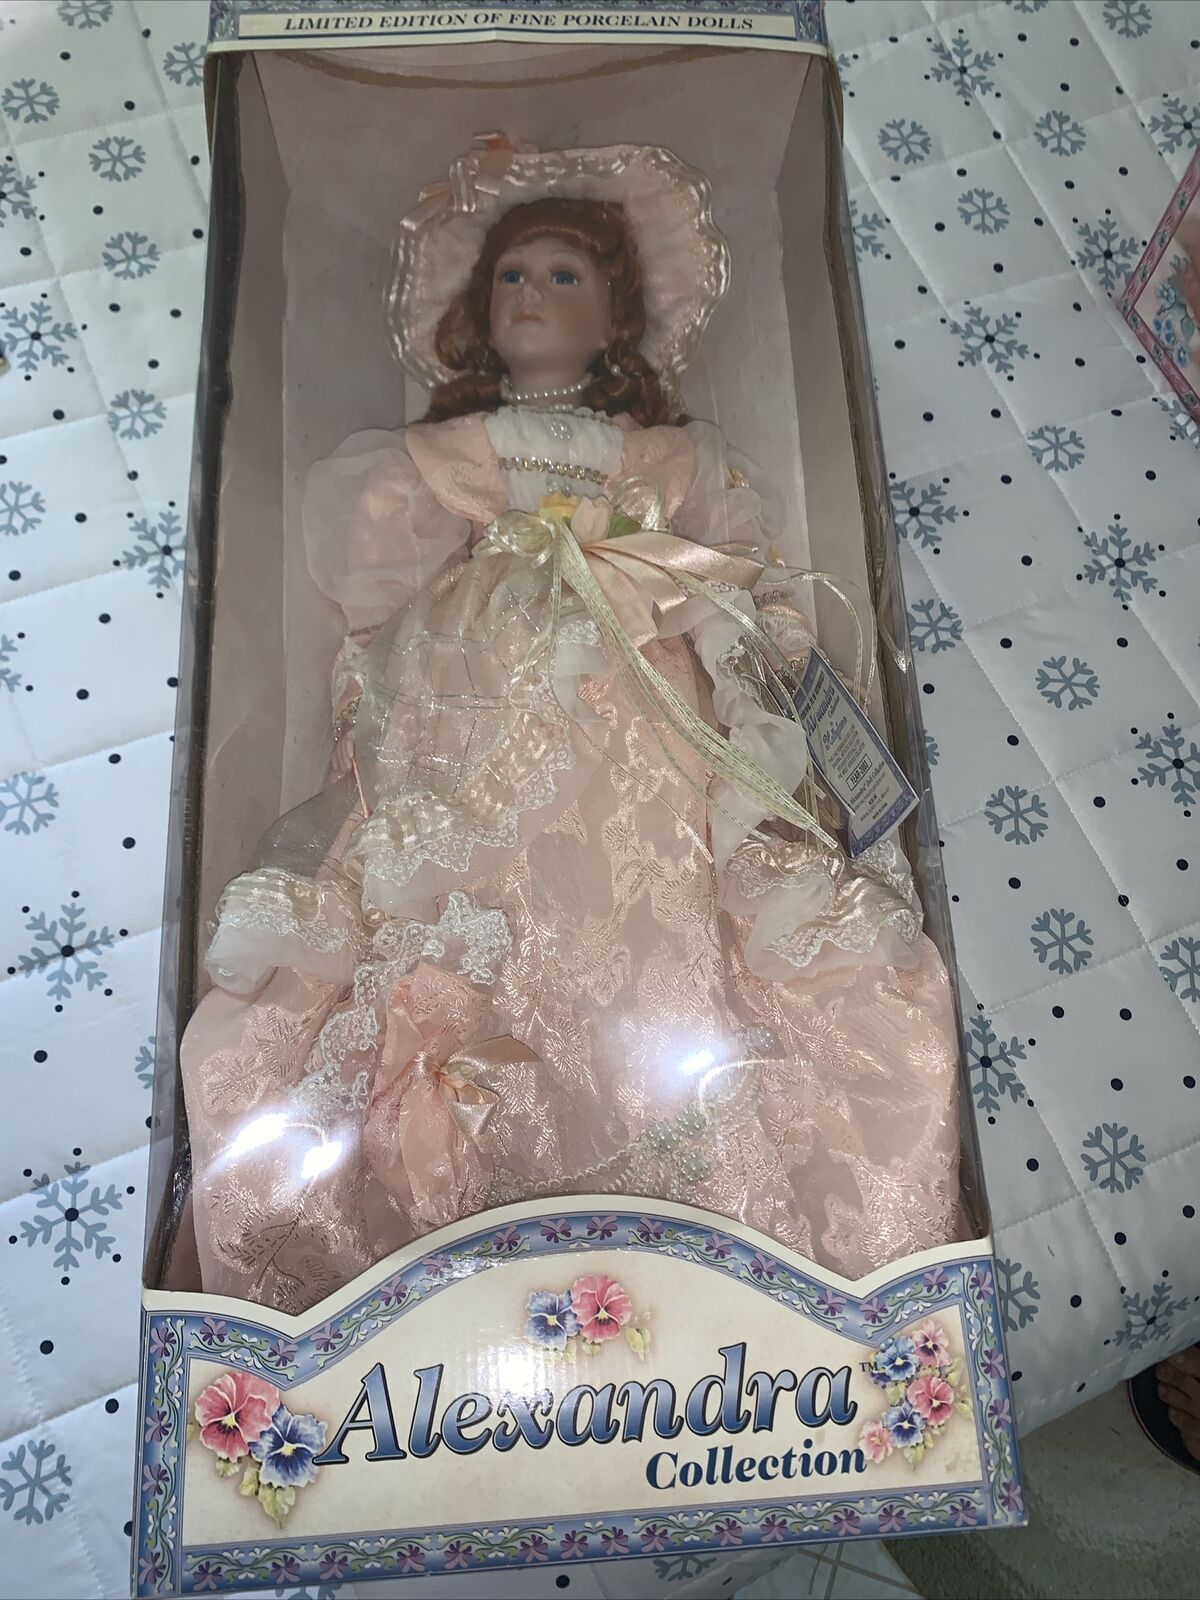 Limited Edition Of Fine Porcelain Dolls By Alexandra Hollylane Coa 9079 In Box